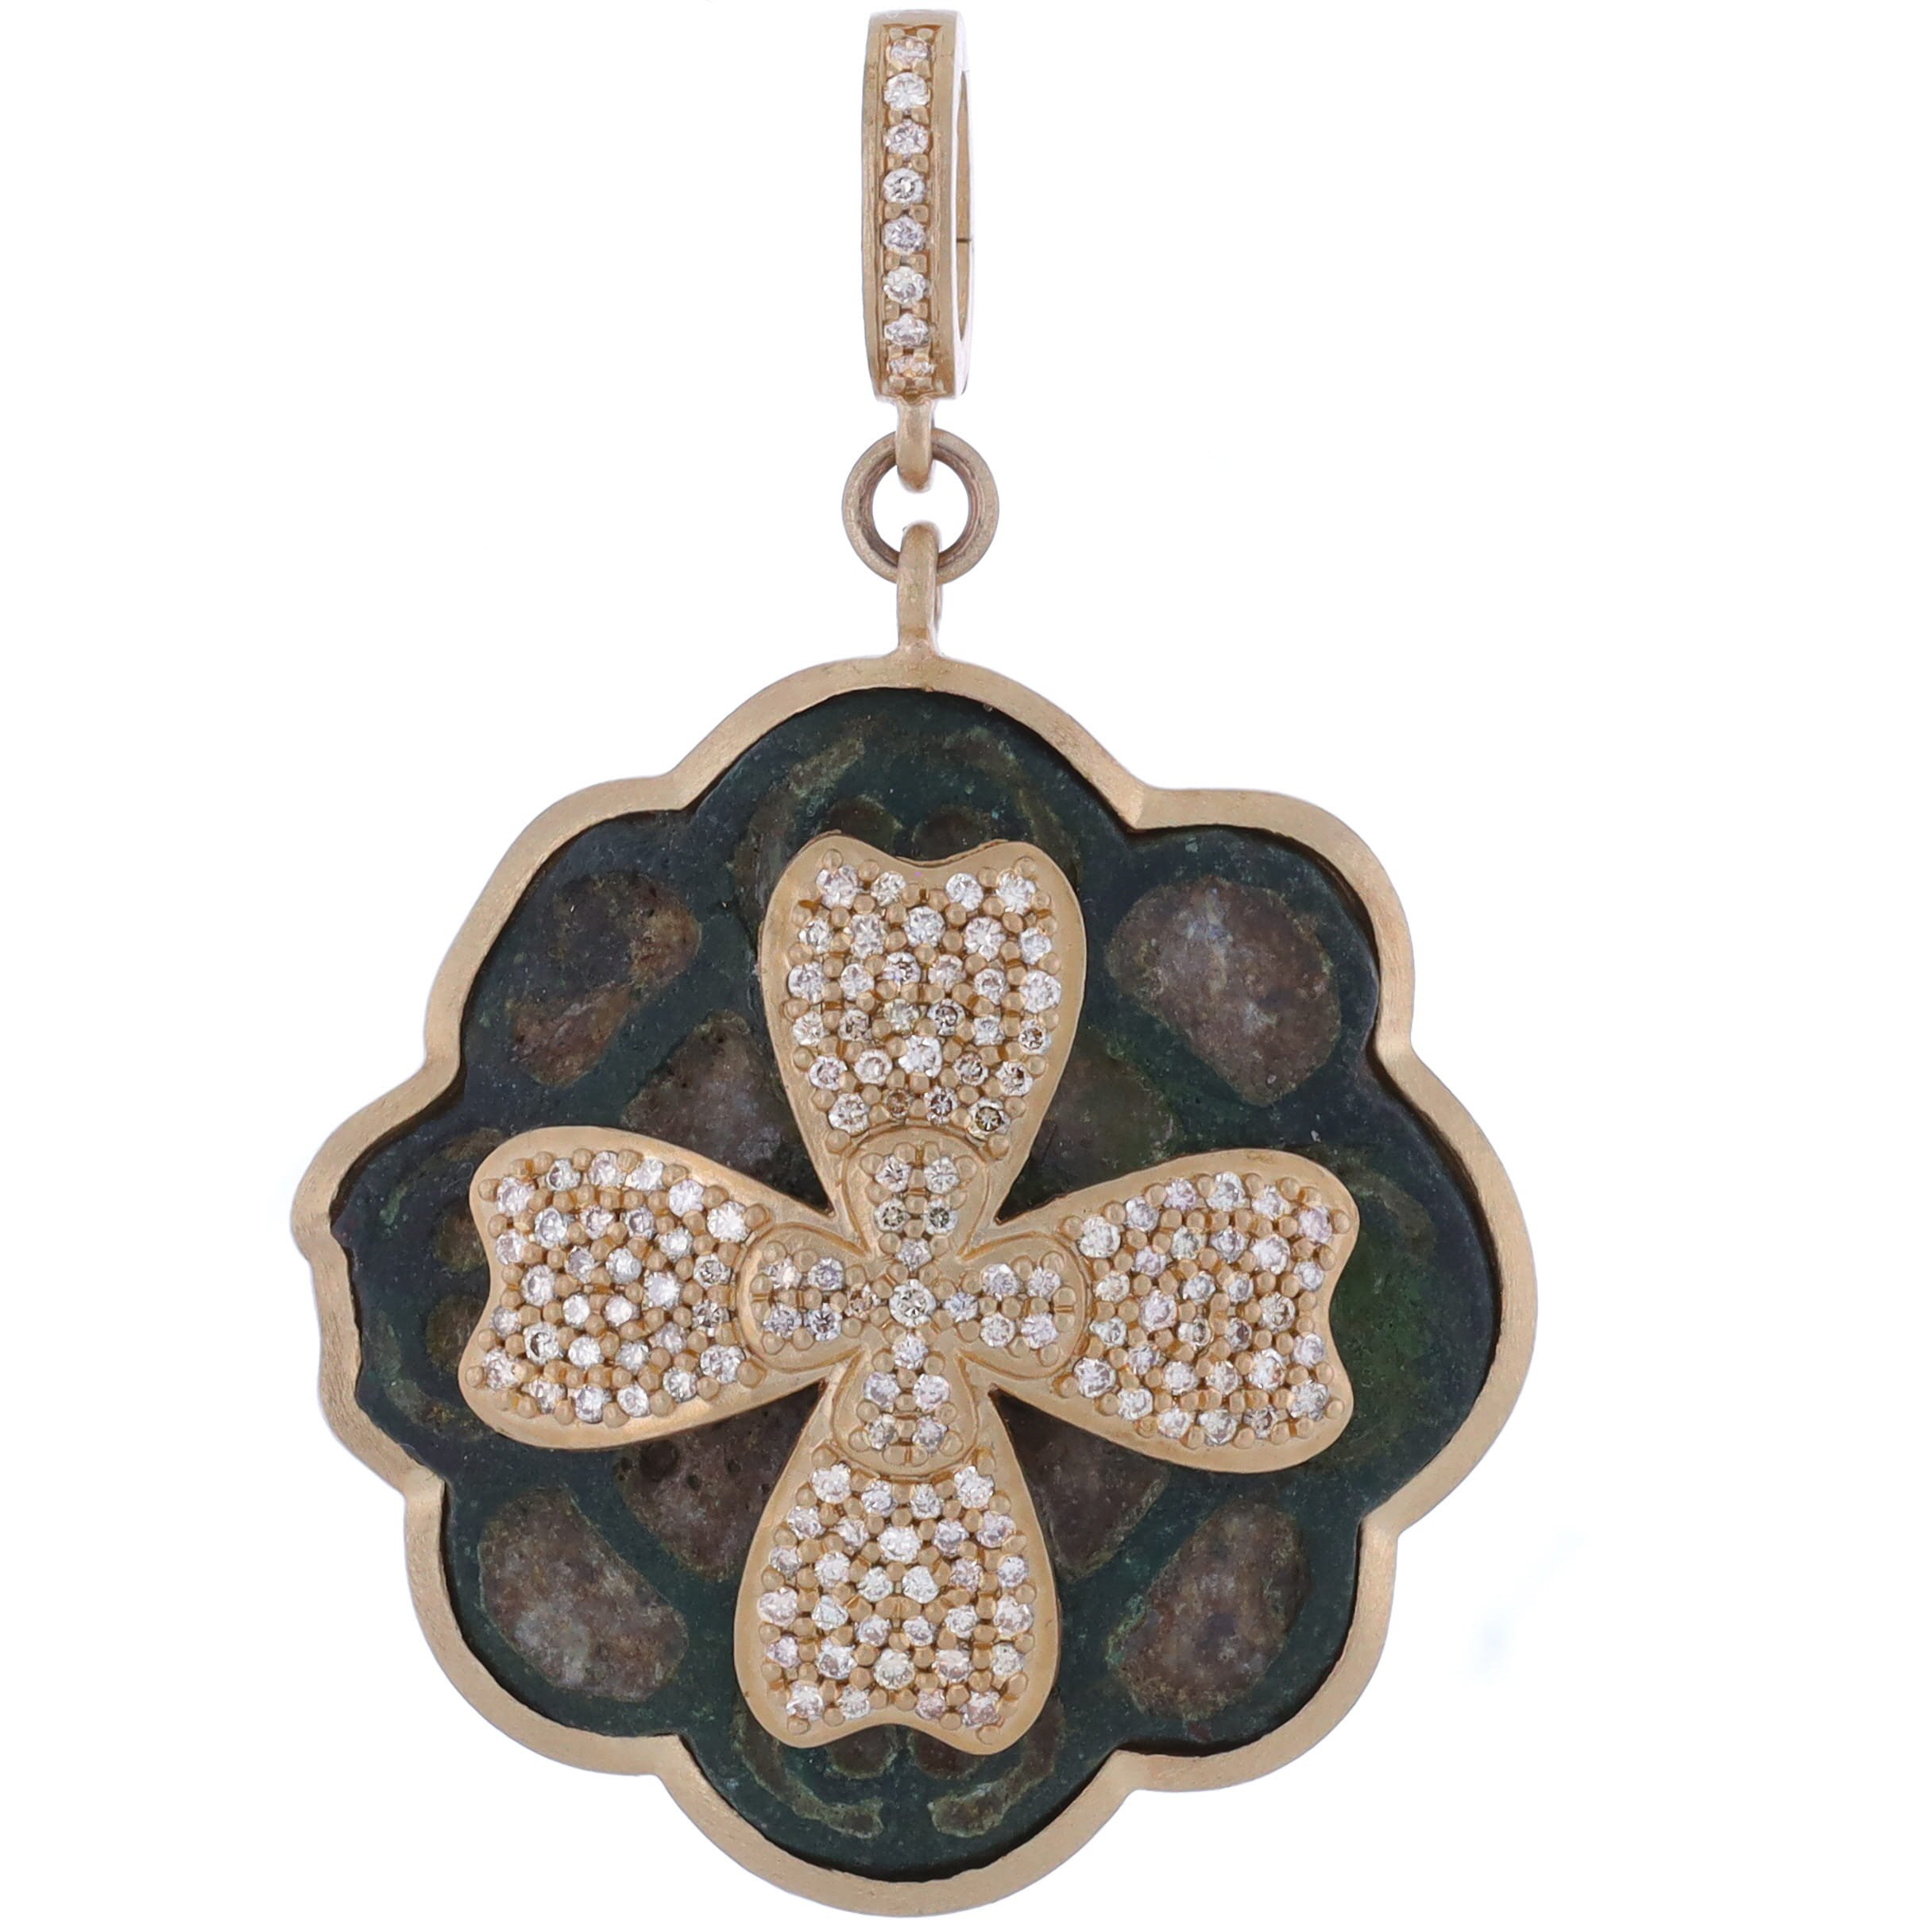 Medieval Bronze Flower Artifact Pendant Embellished with a 14k Gold and Diamond Flower